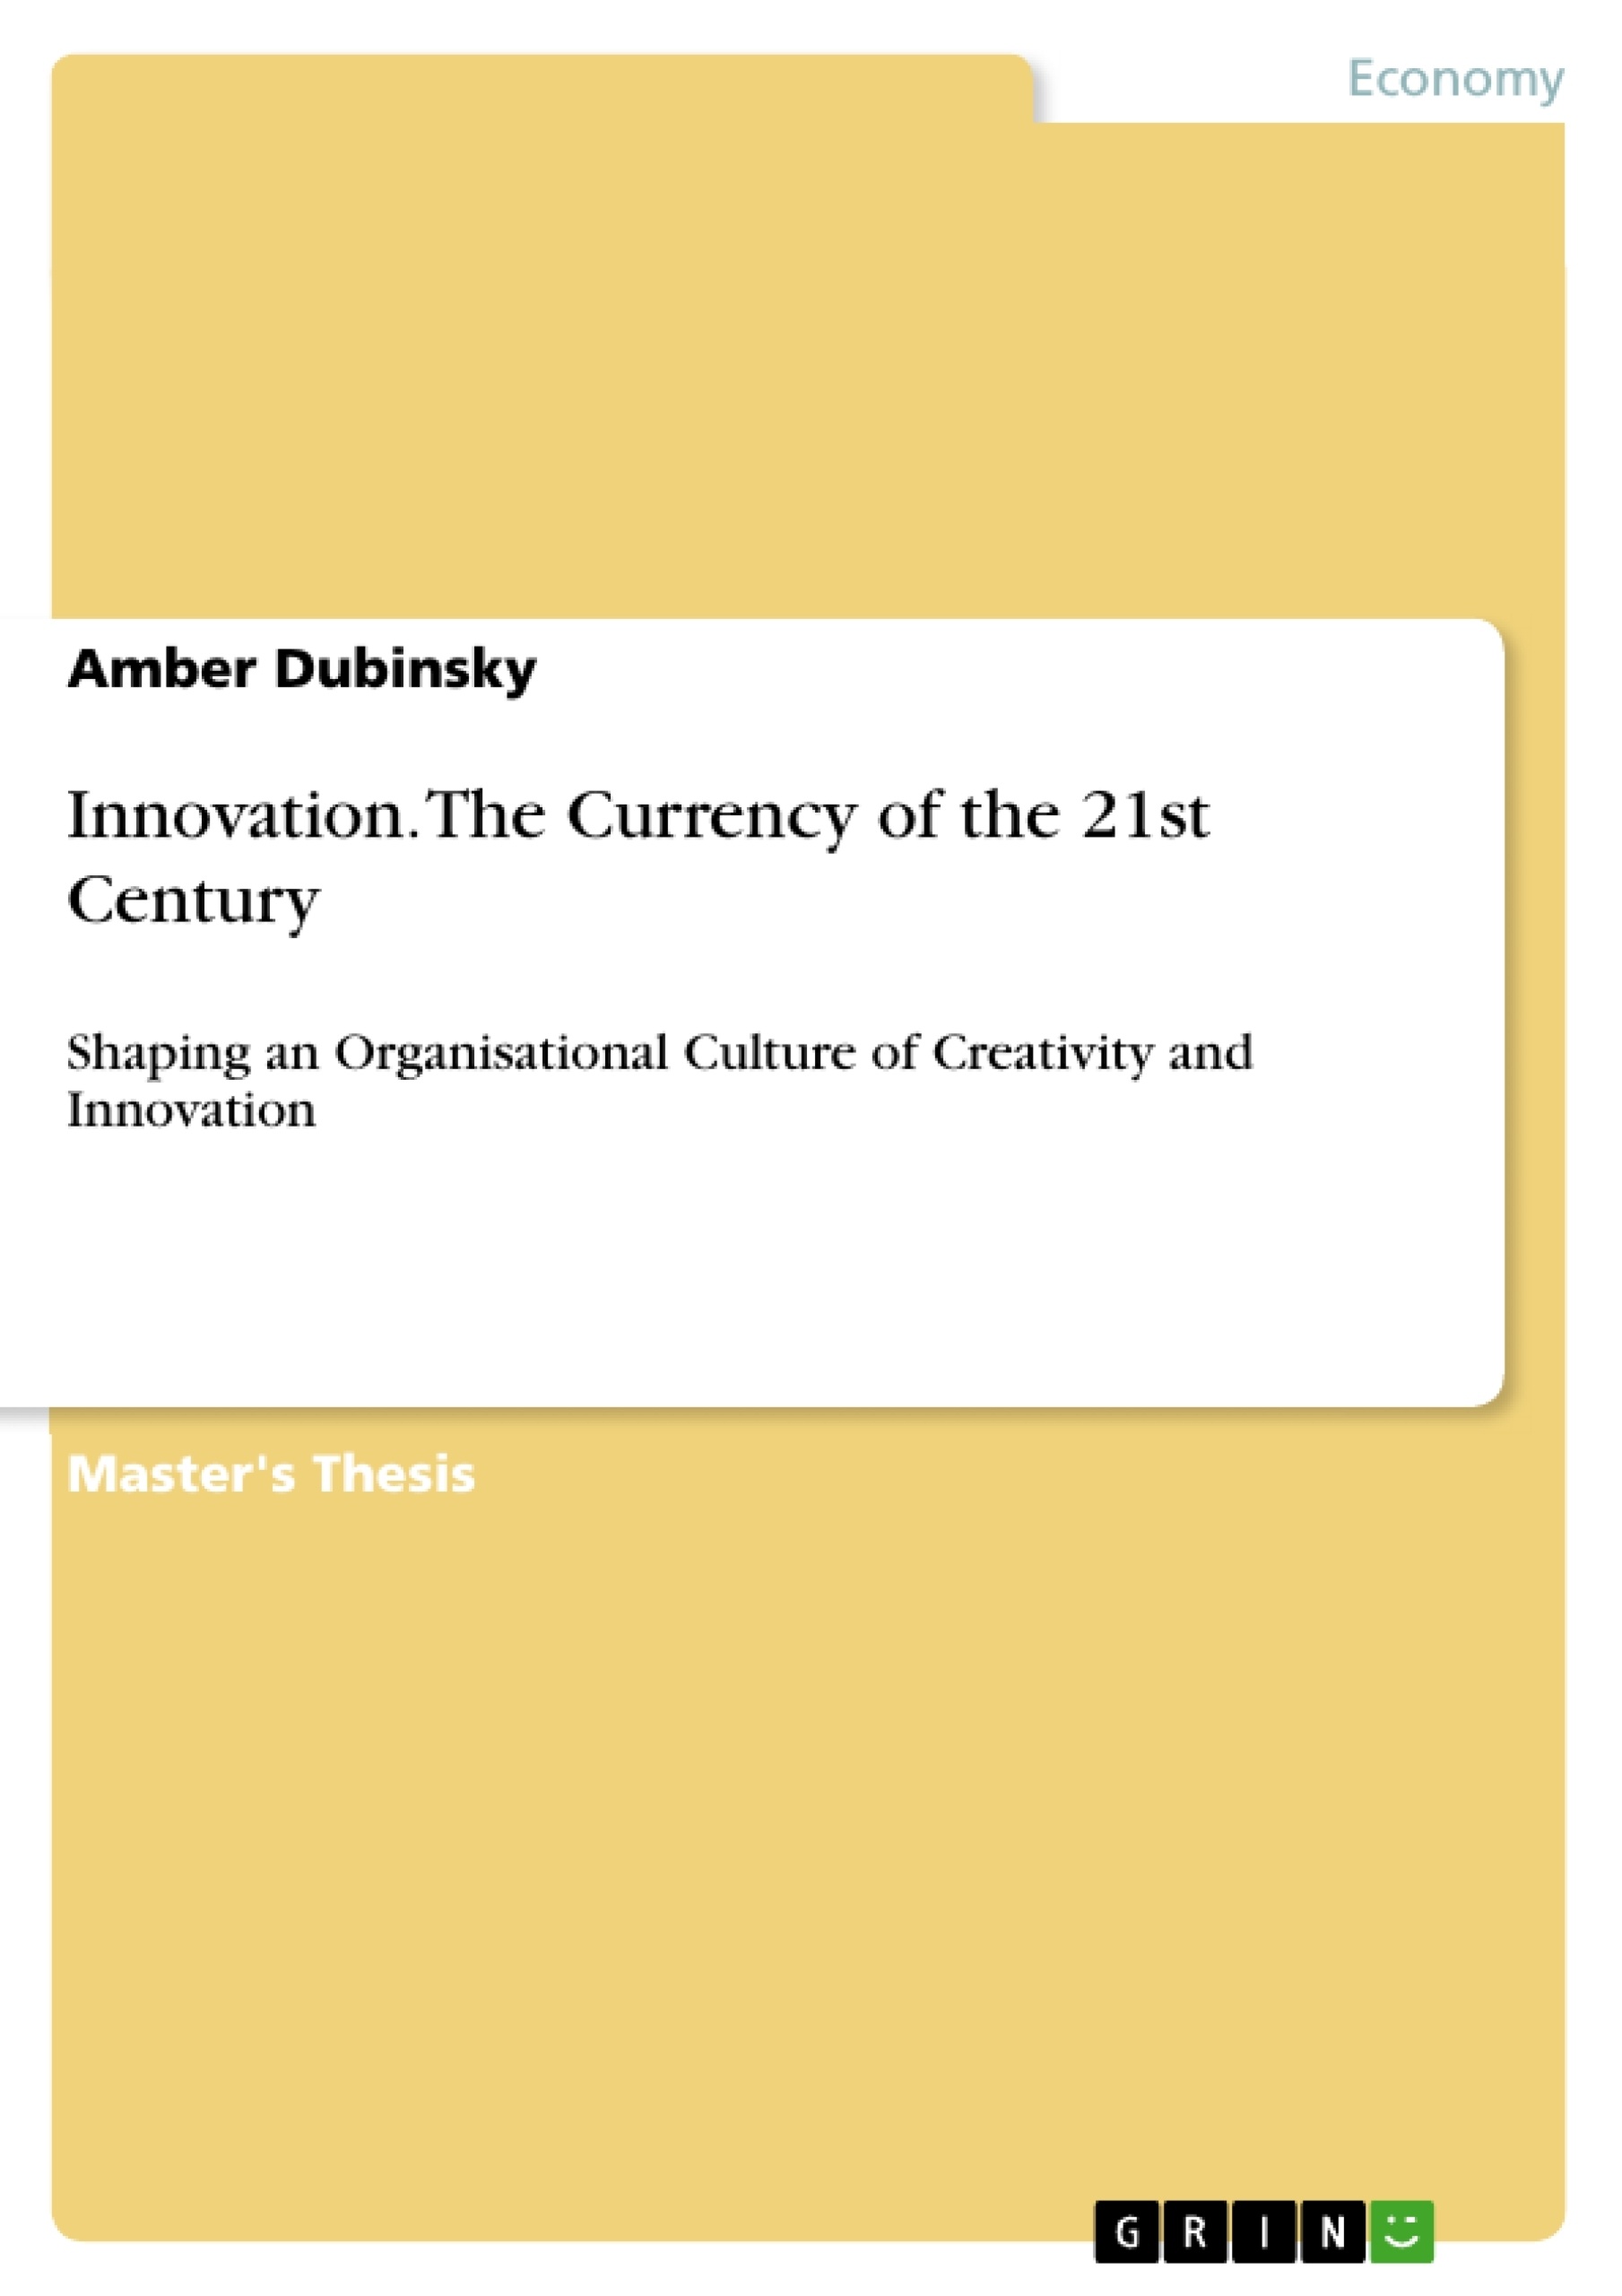 Title: Innovation. The Currency of the 21st Century